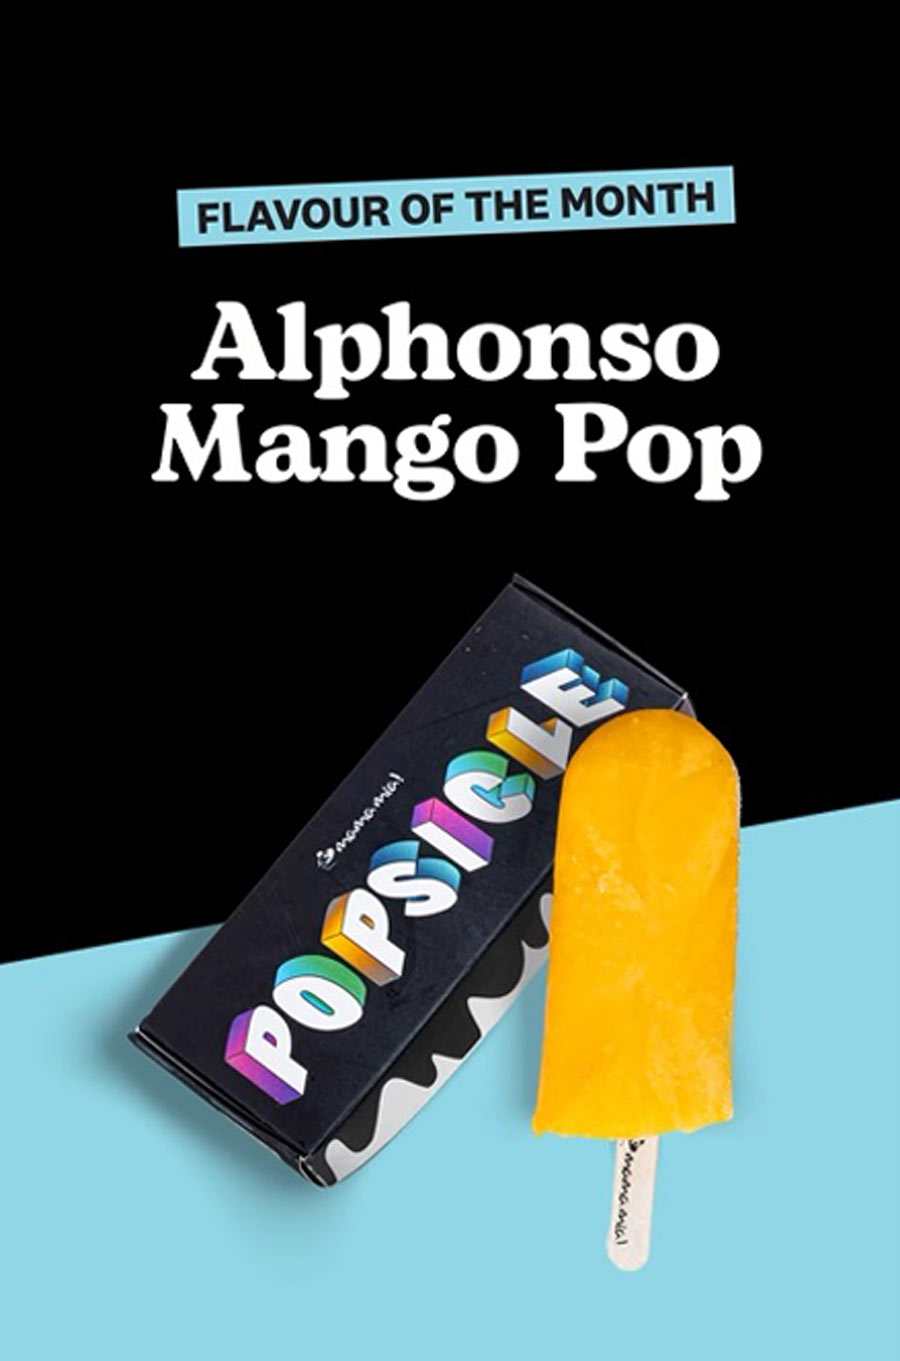 ALPHONSO MANGO POP AT MAMA MIA!: One of the leading gelato brands in the city, Mama Mia! have announced on their social media handles that their flavour of the month is Alphonso Mango Popsicle! It is an icy cool mango-flavoured gelato in the shape of a popsicle!